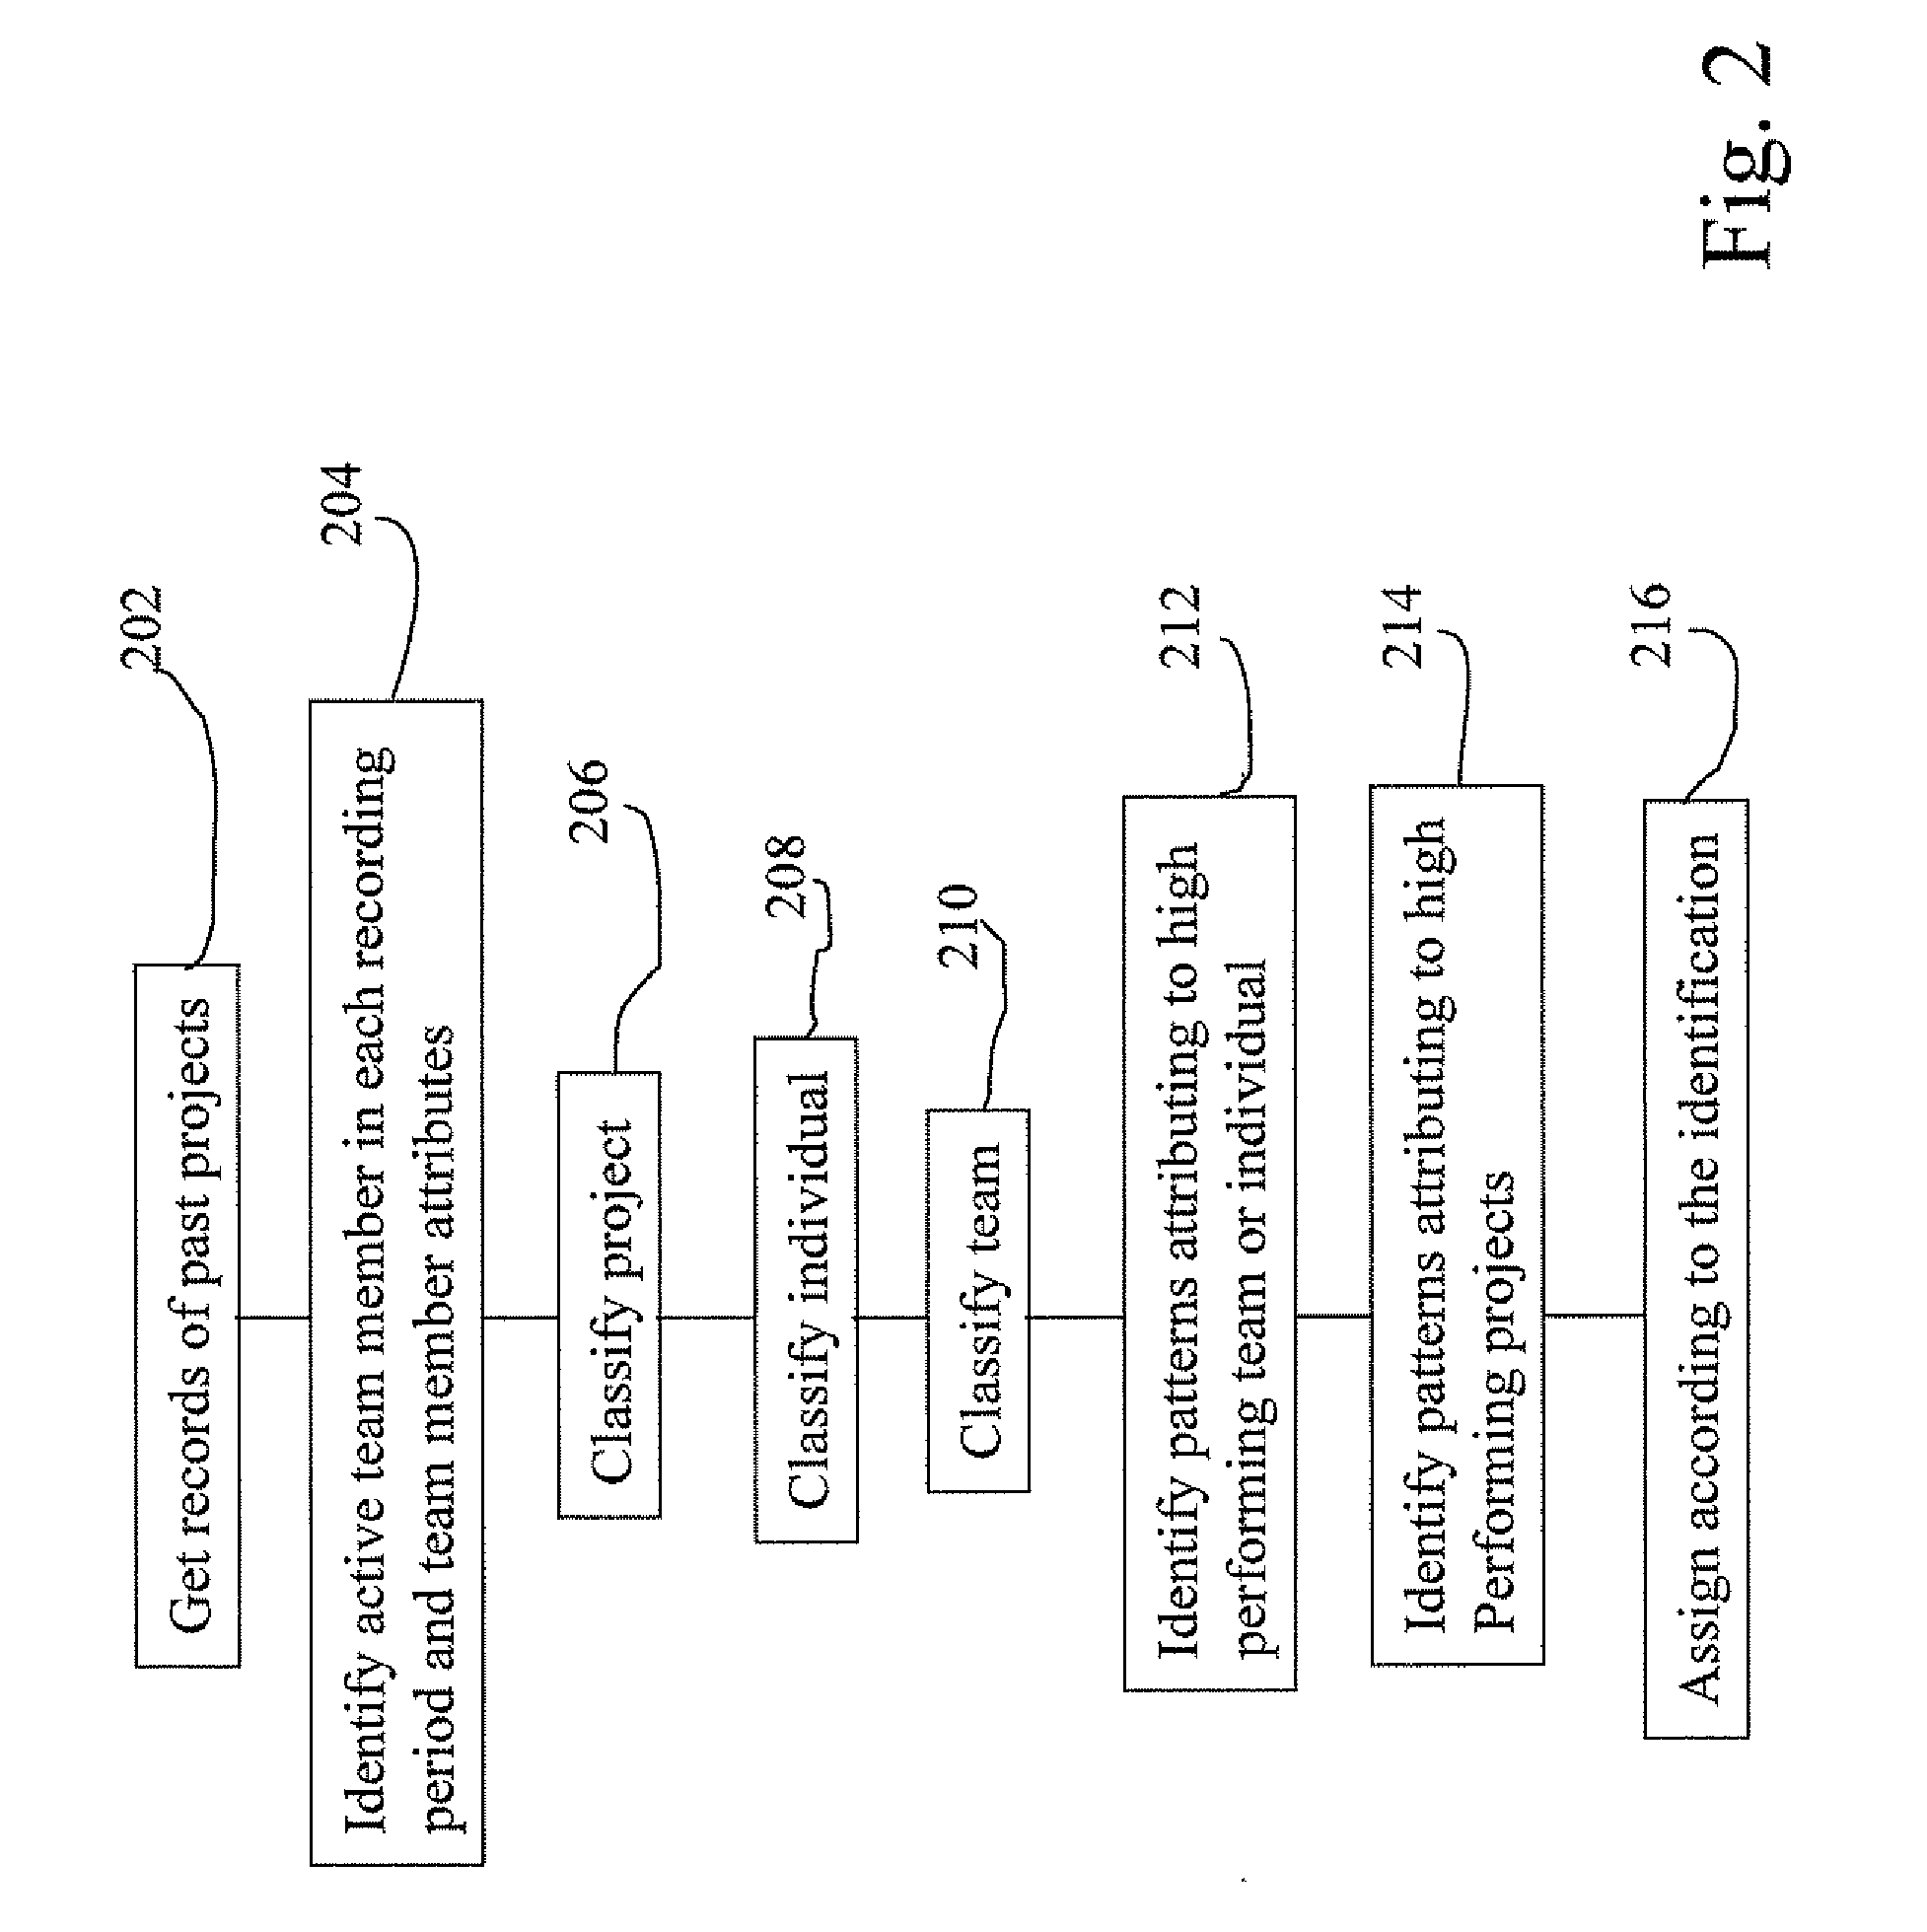 Method and apparatus for identifying and using historical work patterns to build/use high-performance project teams subject to constraints